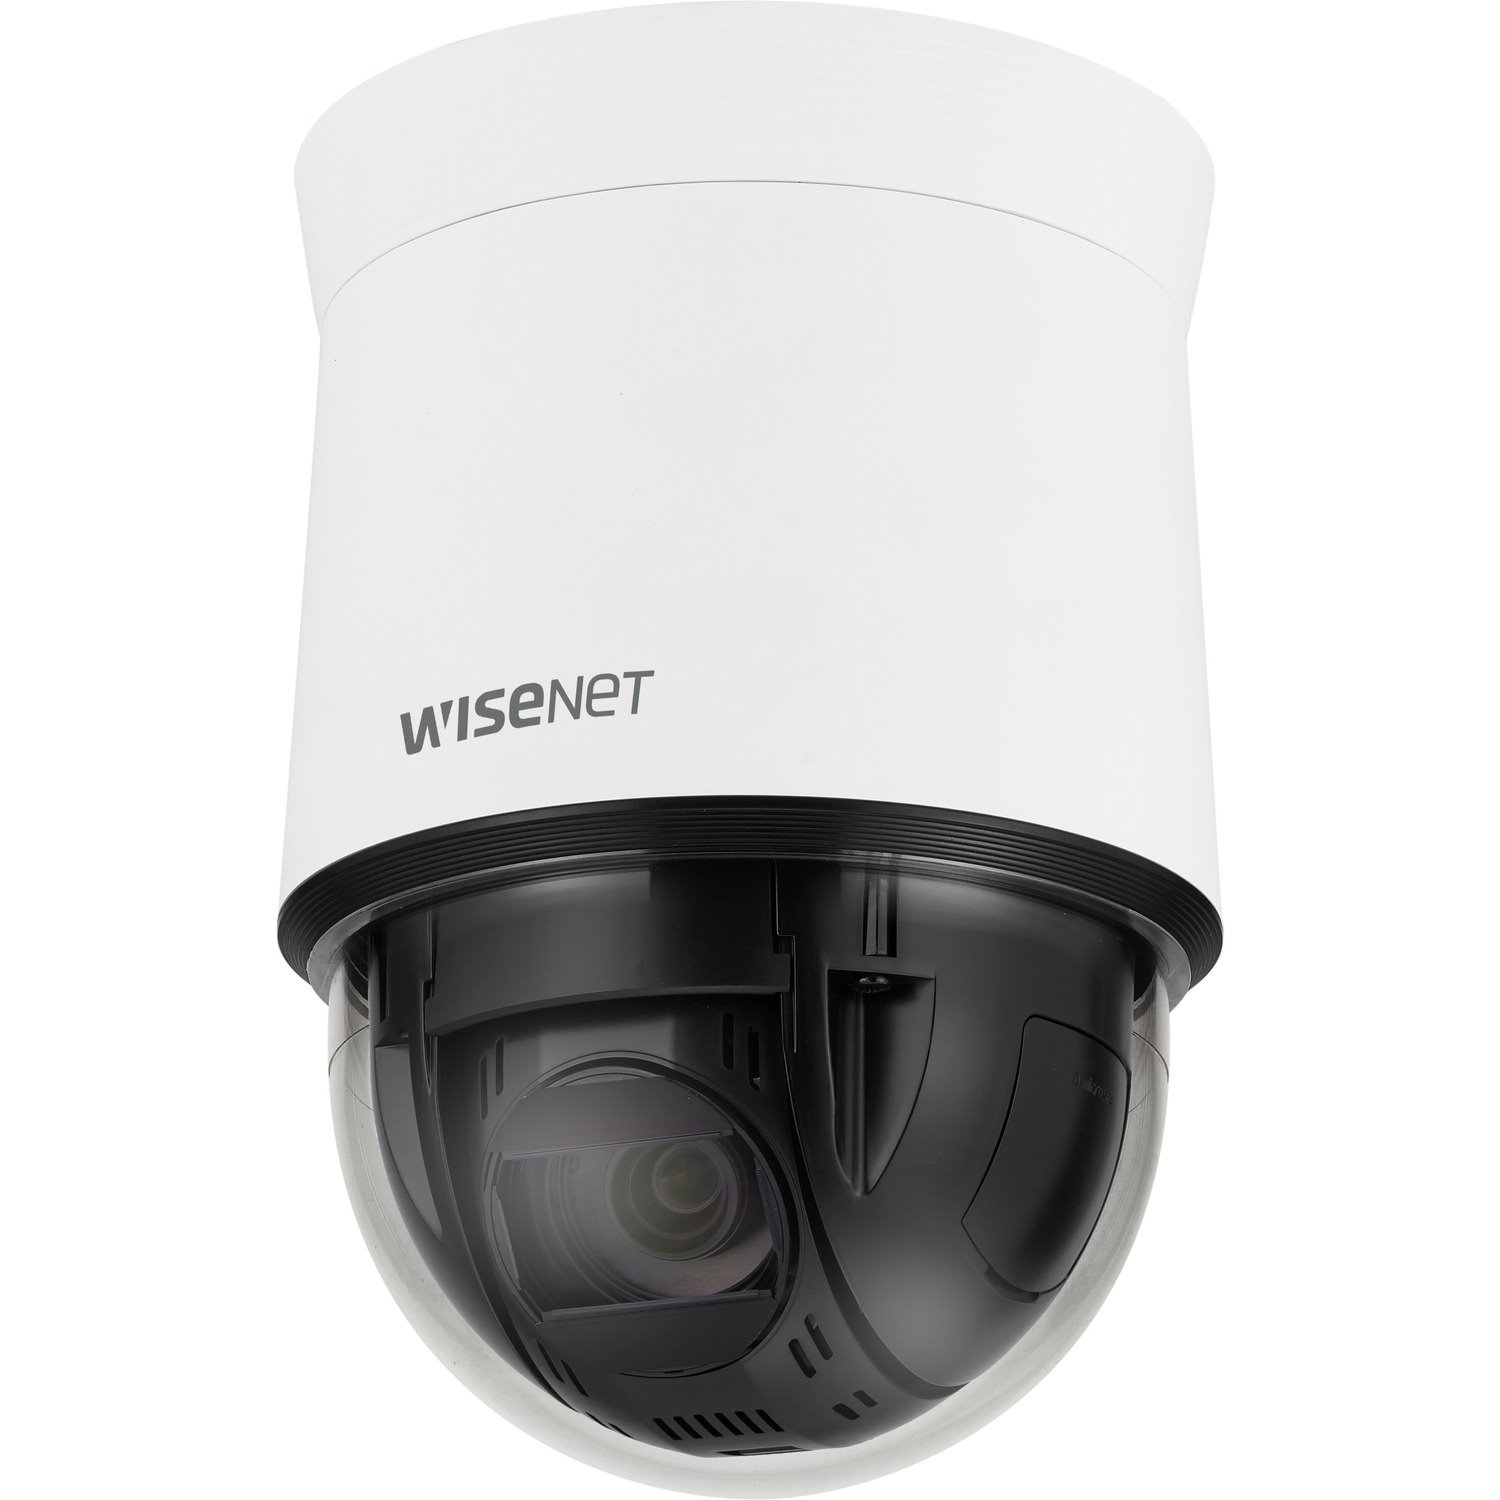 Wisenet QNP-6230 2.4 Megapixel Full HD Network Camera - Color - Dome - Ivory